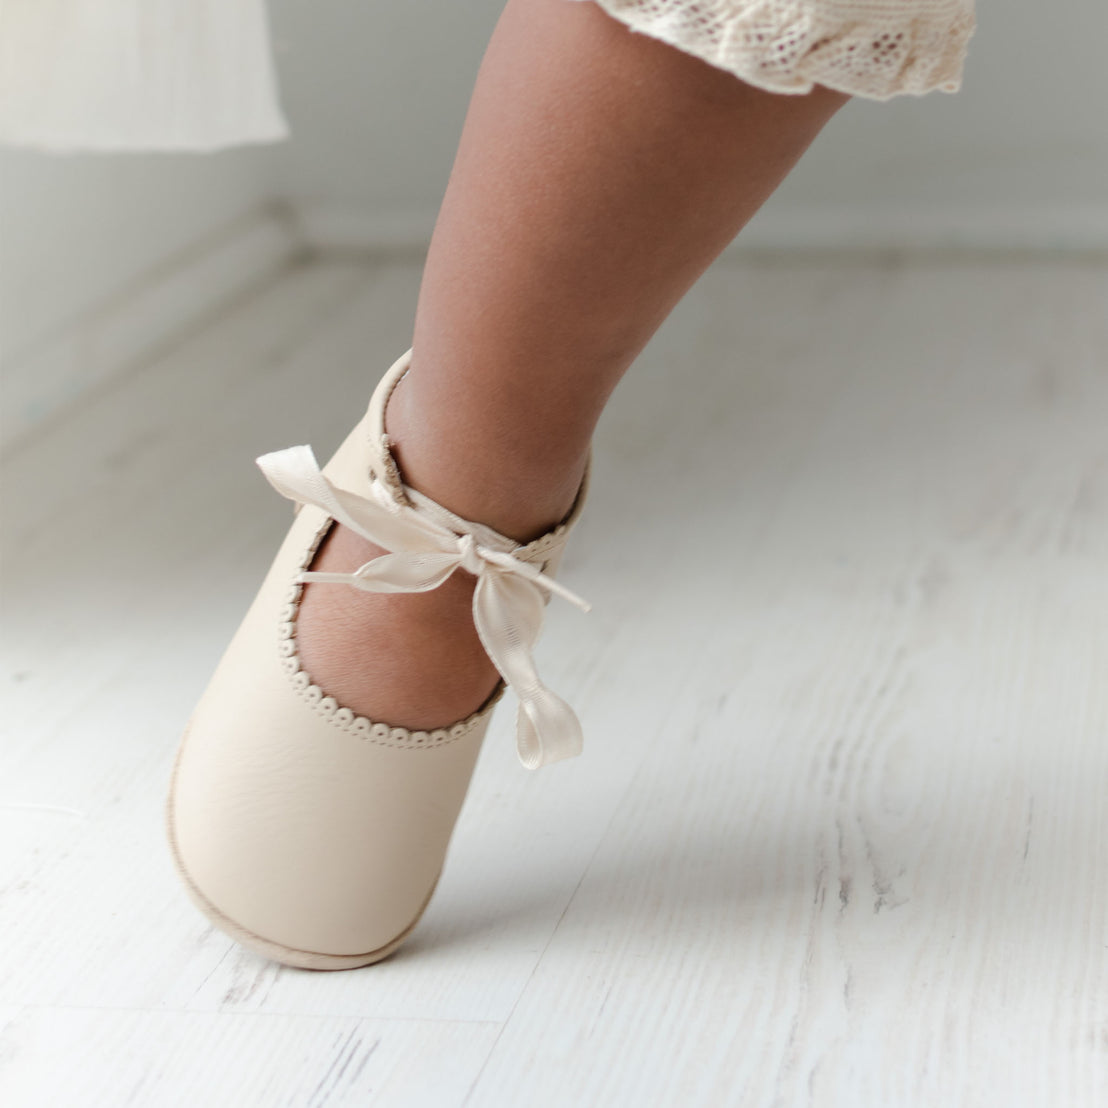 Baby foot wearing the Tan Tie Mary Janes crafted with tan matte leather with beautiful scallop edge detail and complimenting cotton ribbon tie.